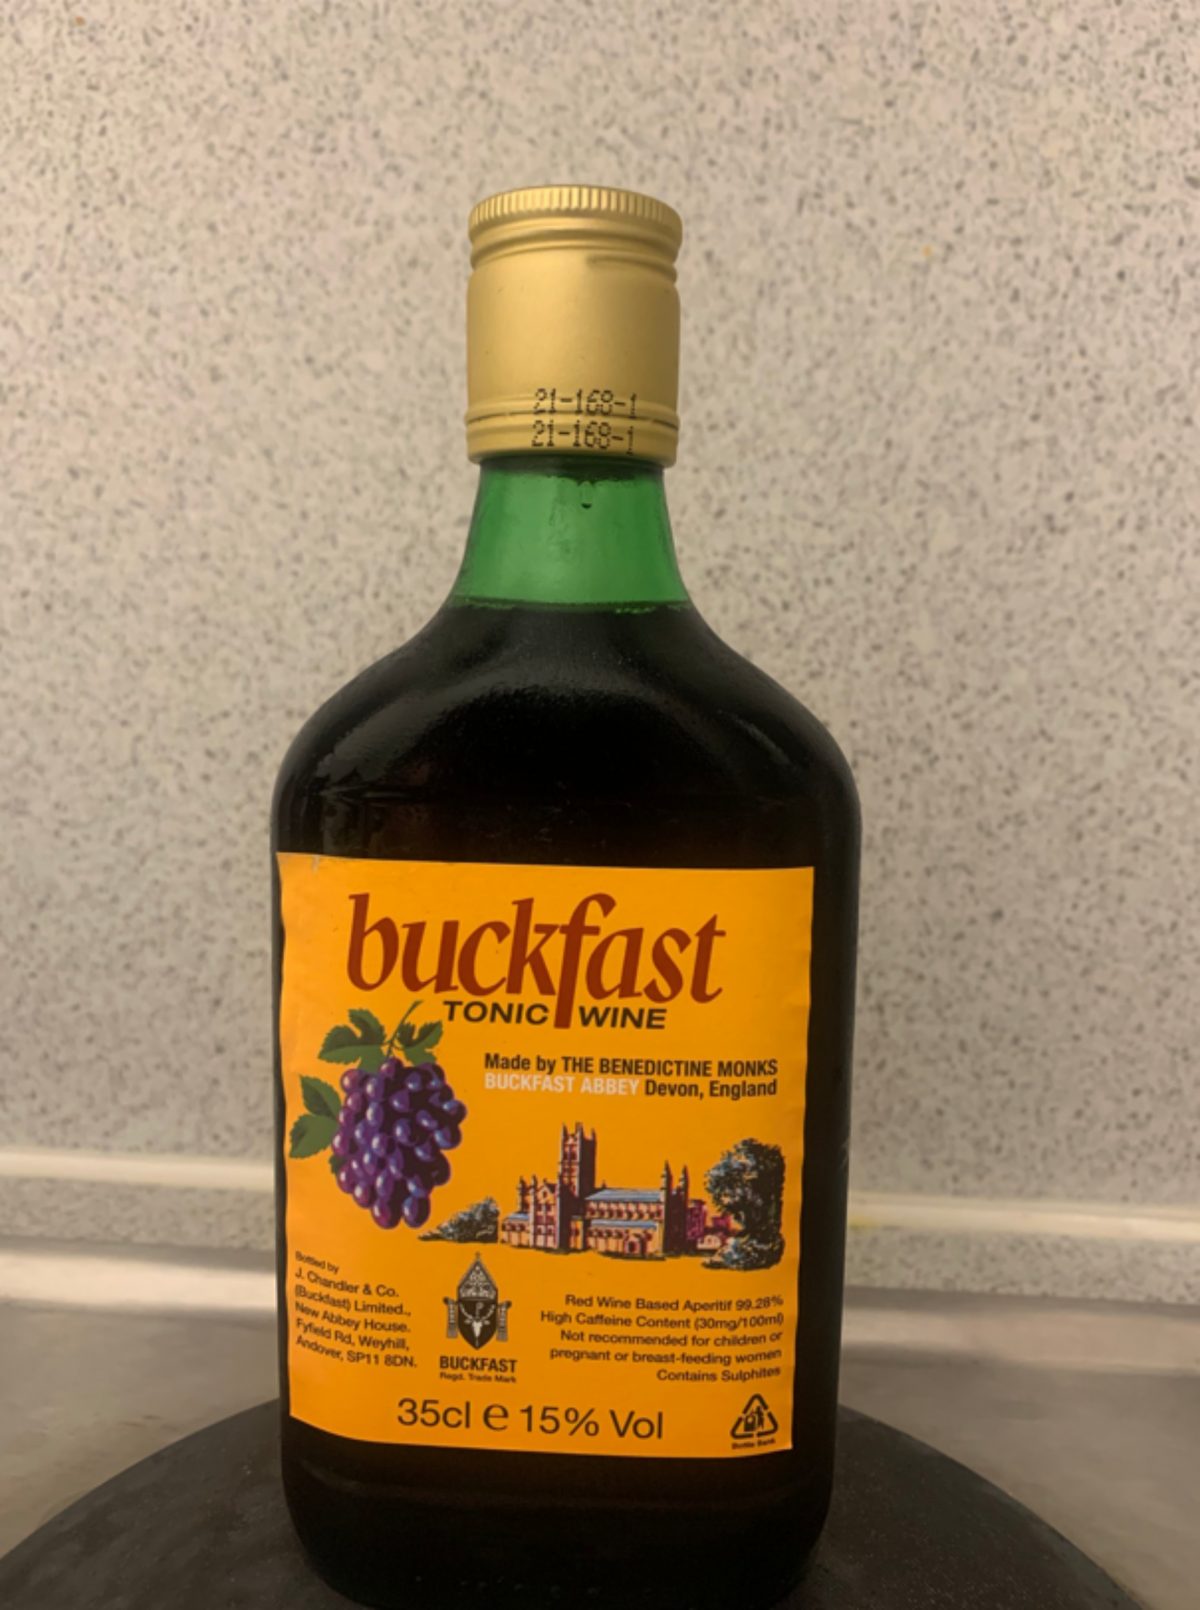 A bottle of Buckfast sits on a table